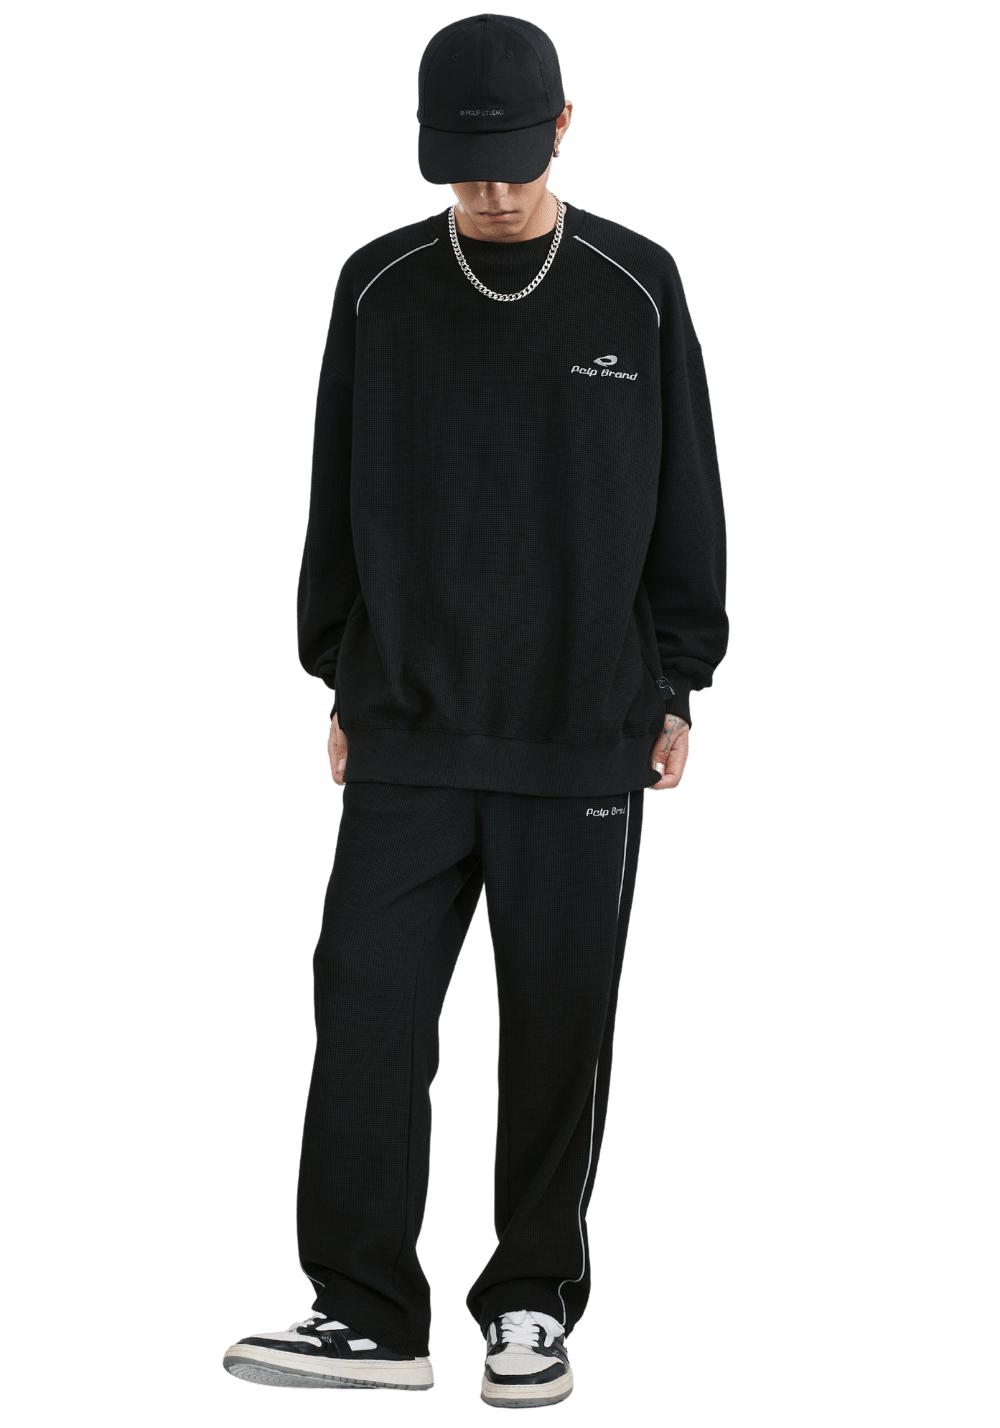 Embroidered Houndstooth Sweatpant - PSYLOS 1, Embroidered Houndstooth Sweatpant, Pants, PCLP, PSYLOS 1